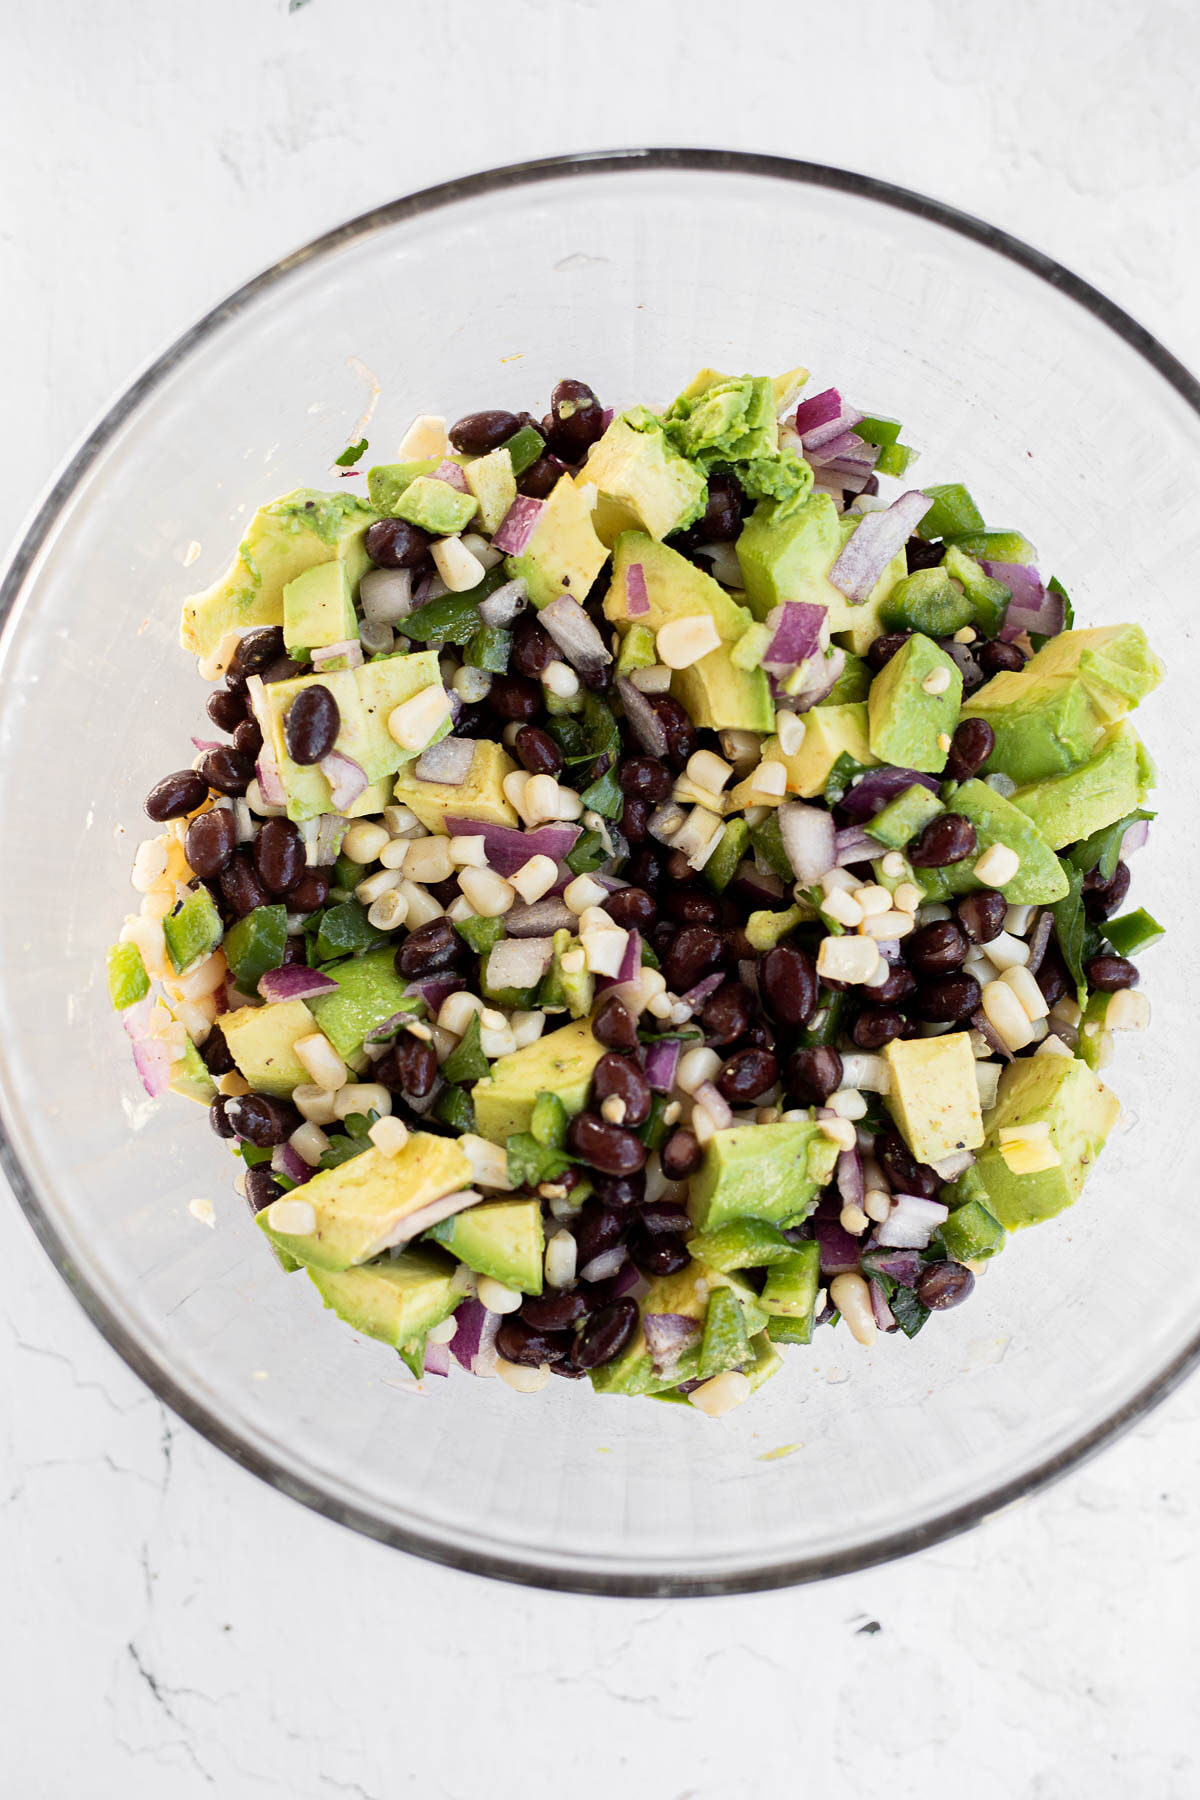 Black beans, corn, avocado, green pepper, and red onions in a glass bowl.